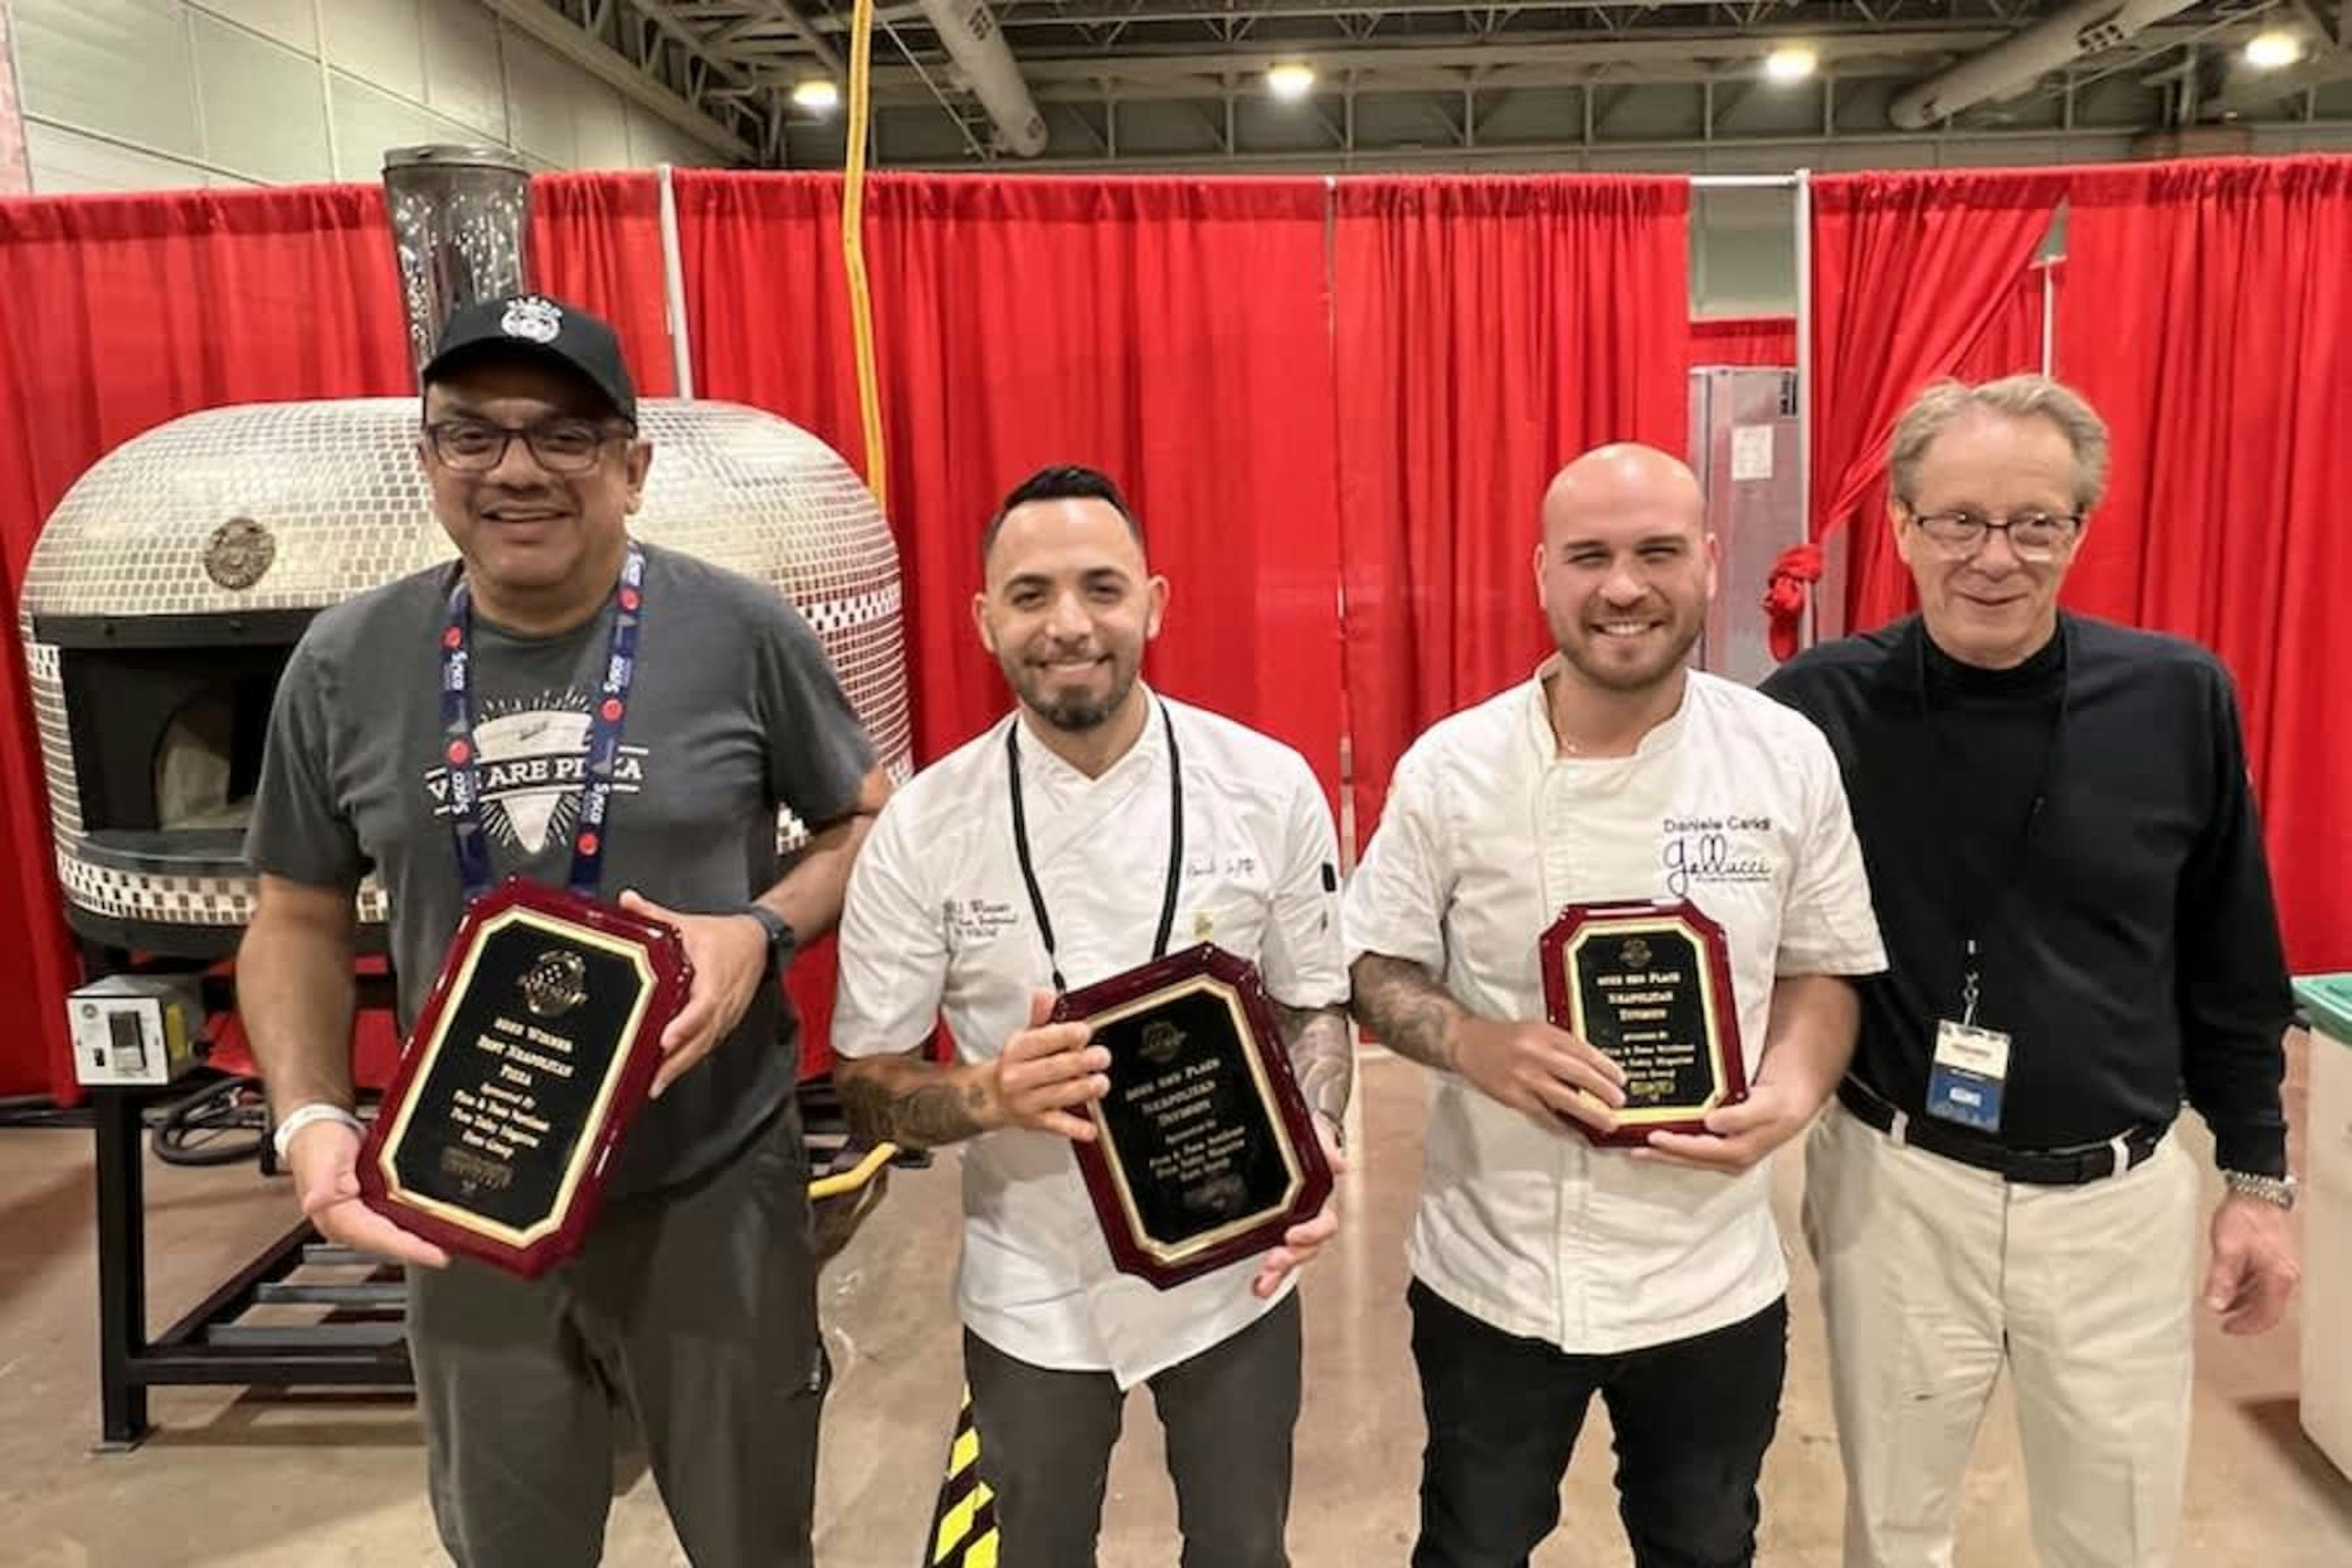 Pizza and Pasta Northeast 2022 Competition Winners are